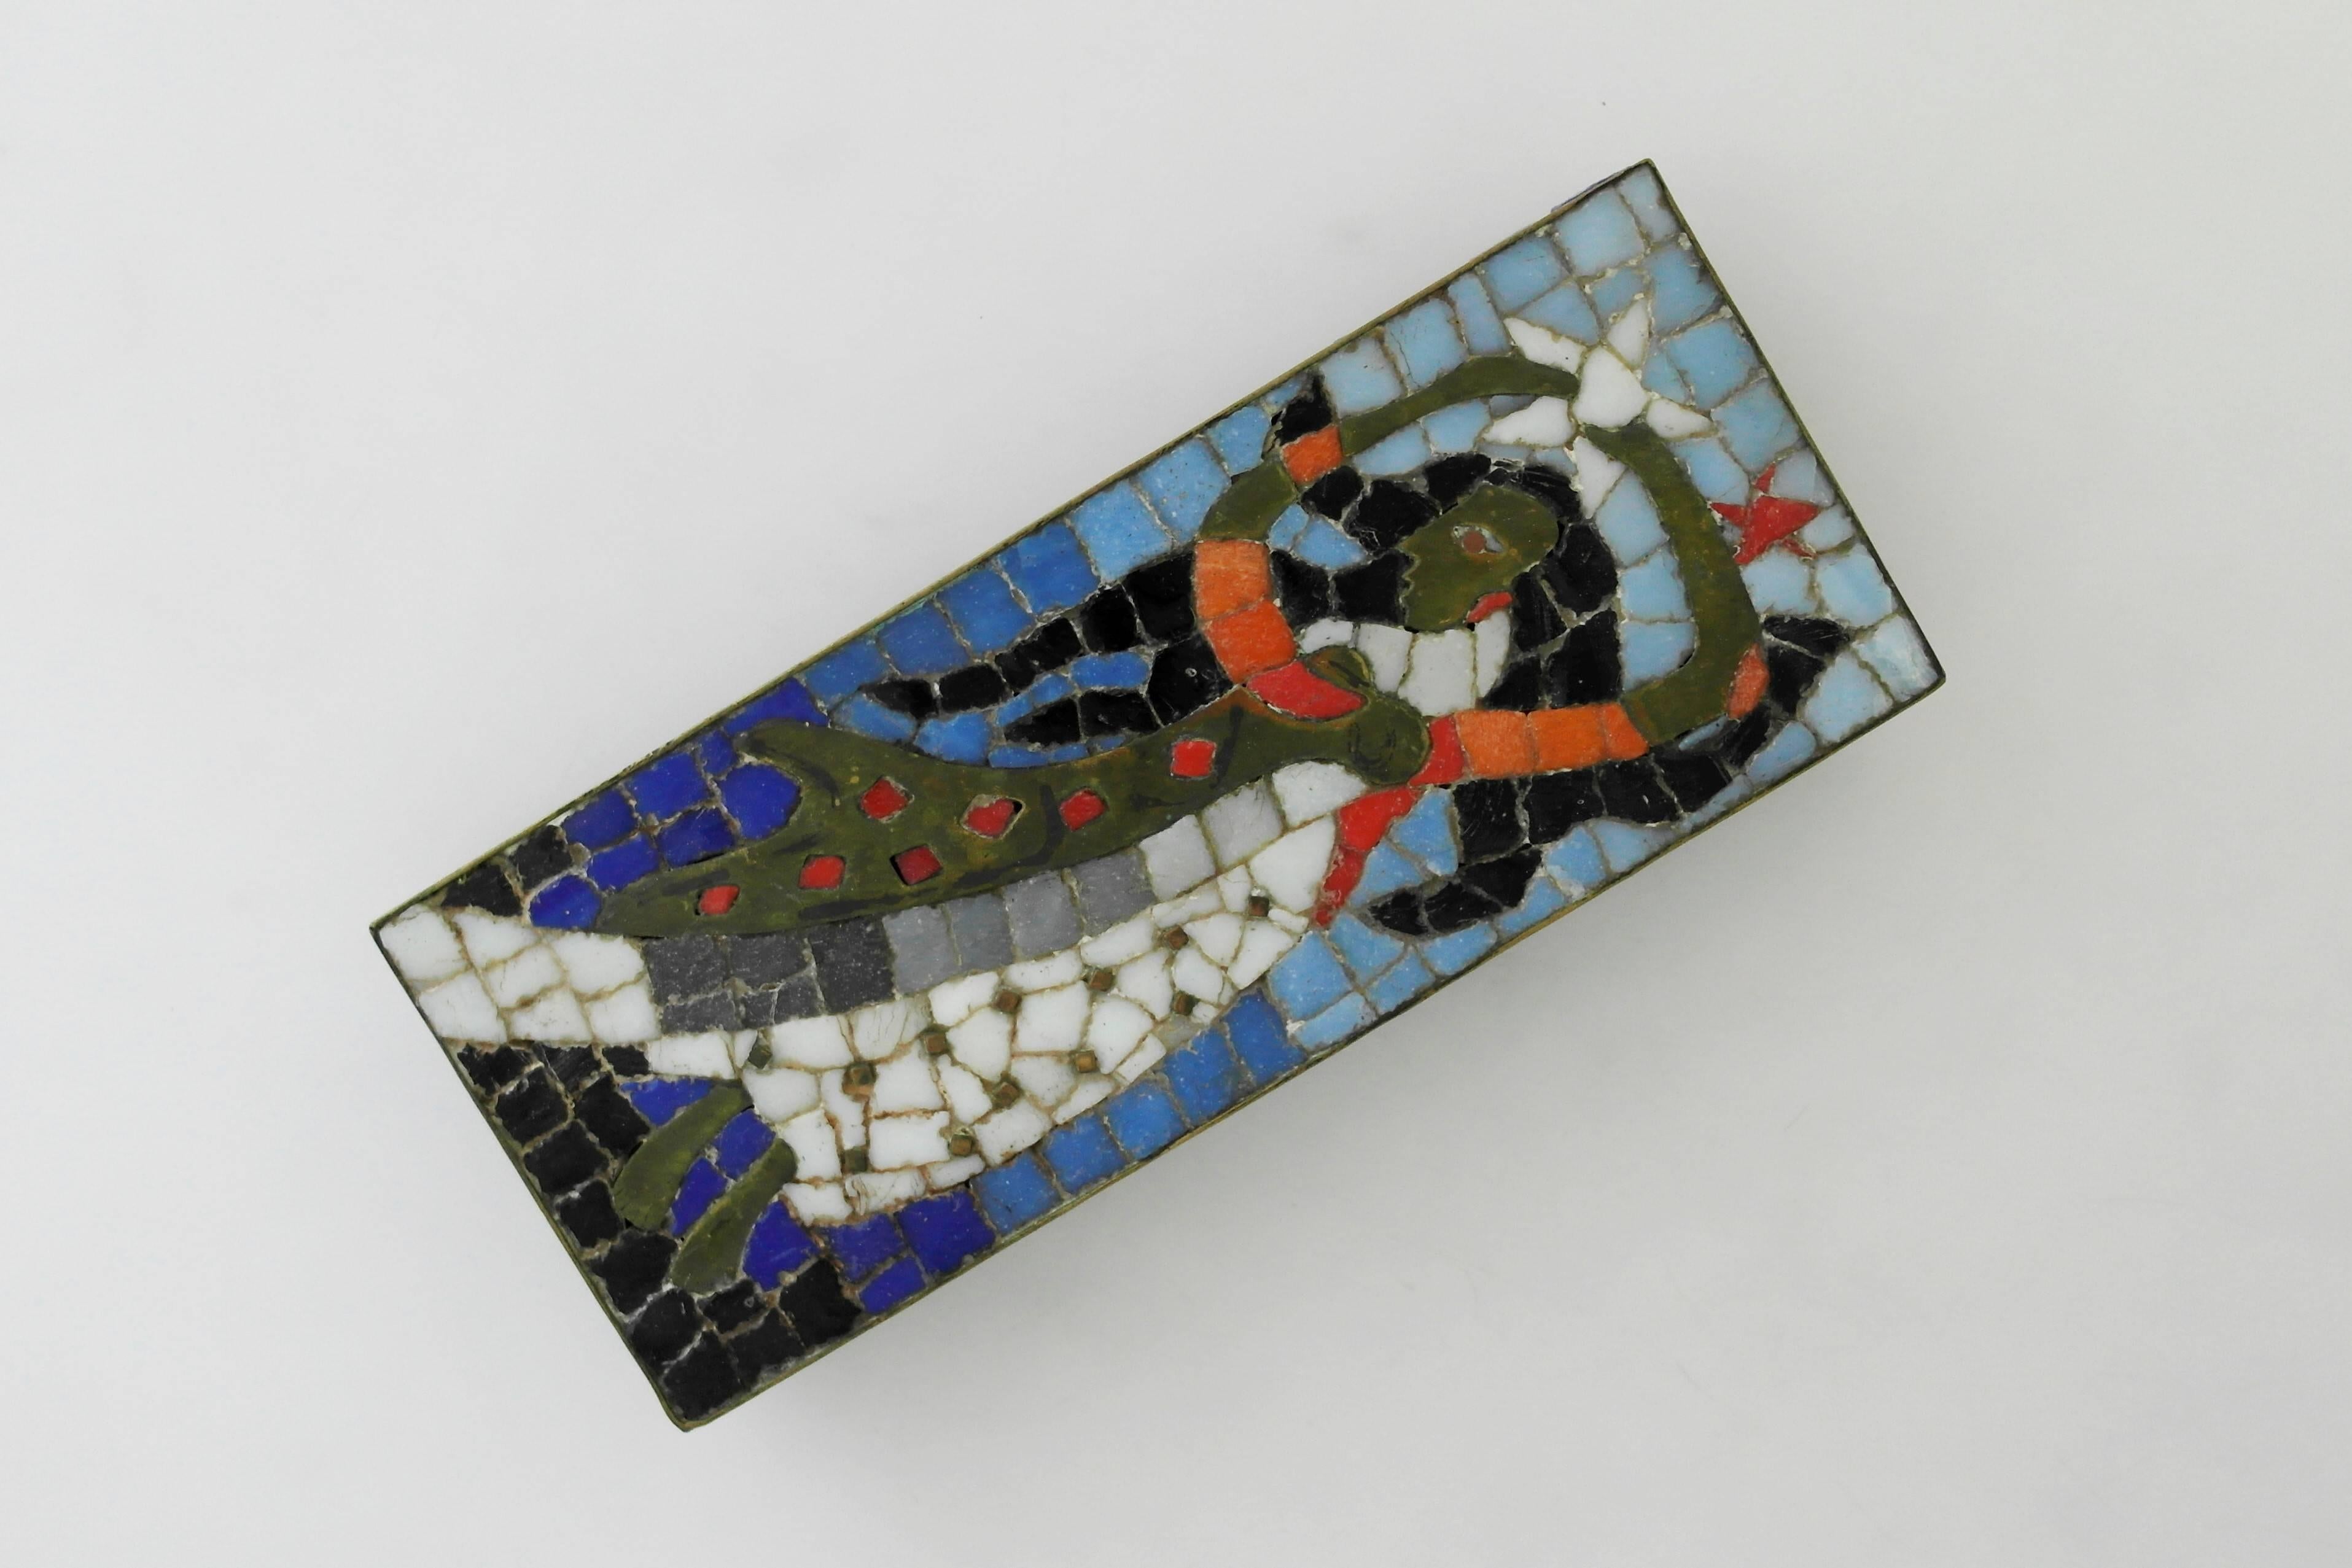 Being offered is a large brass and mosaic glass box by Salvador Teran of Taxco, Mexico. Hand-wrought rectangular box made of brass, with multicolored glass tiles forming a Pre-Columbian motif. Dimensions: 10 1/4 inches long x 4 1/4 inches wide x 1